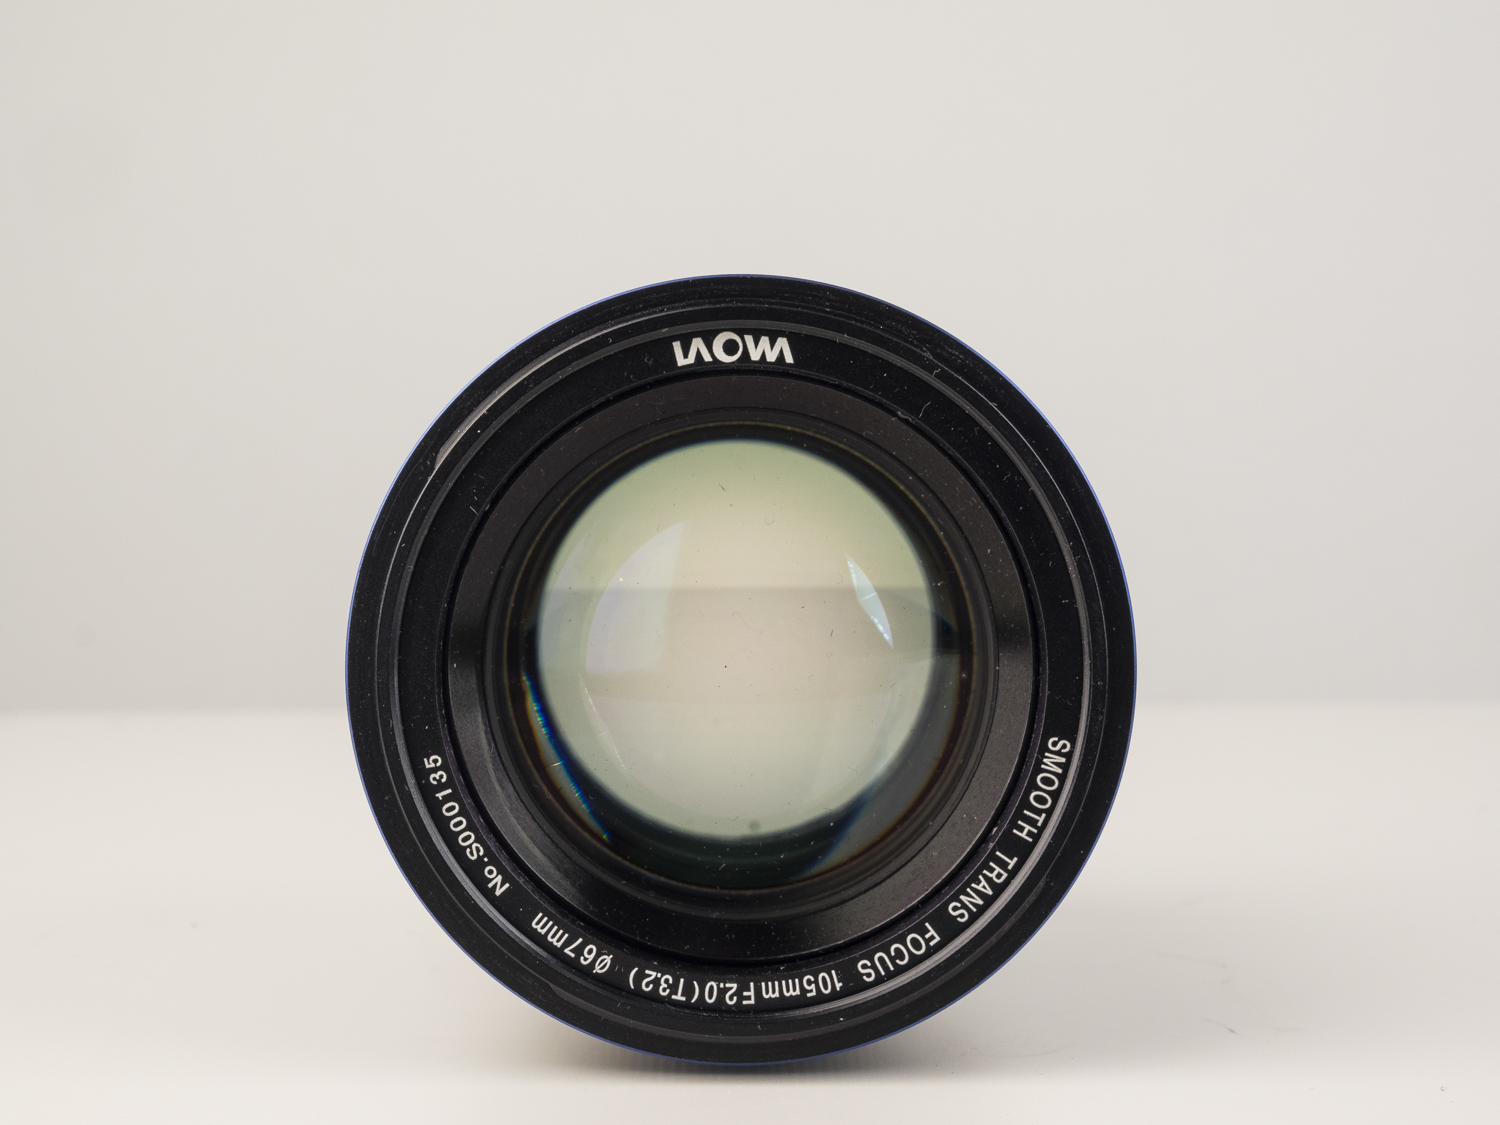 laowa 105mm f2 STF lens product images 04.jpg